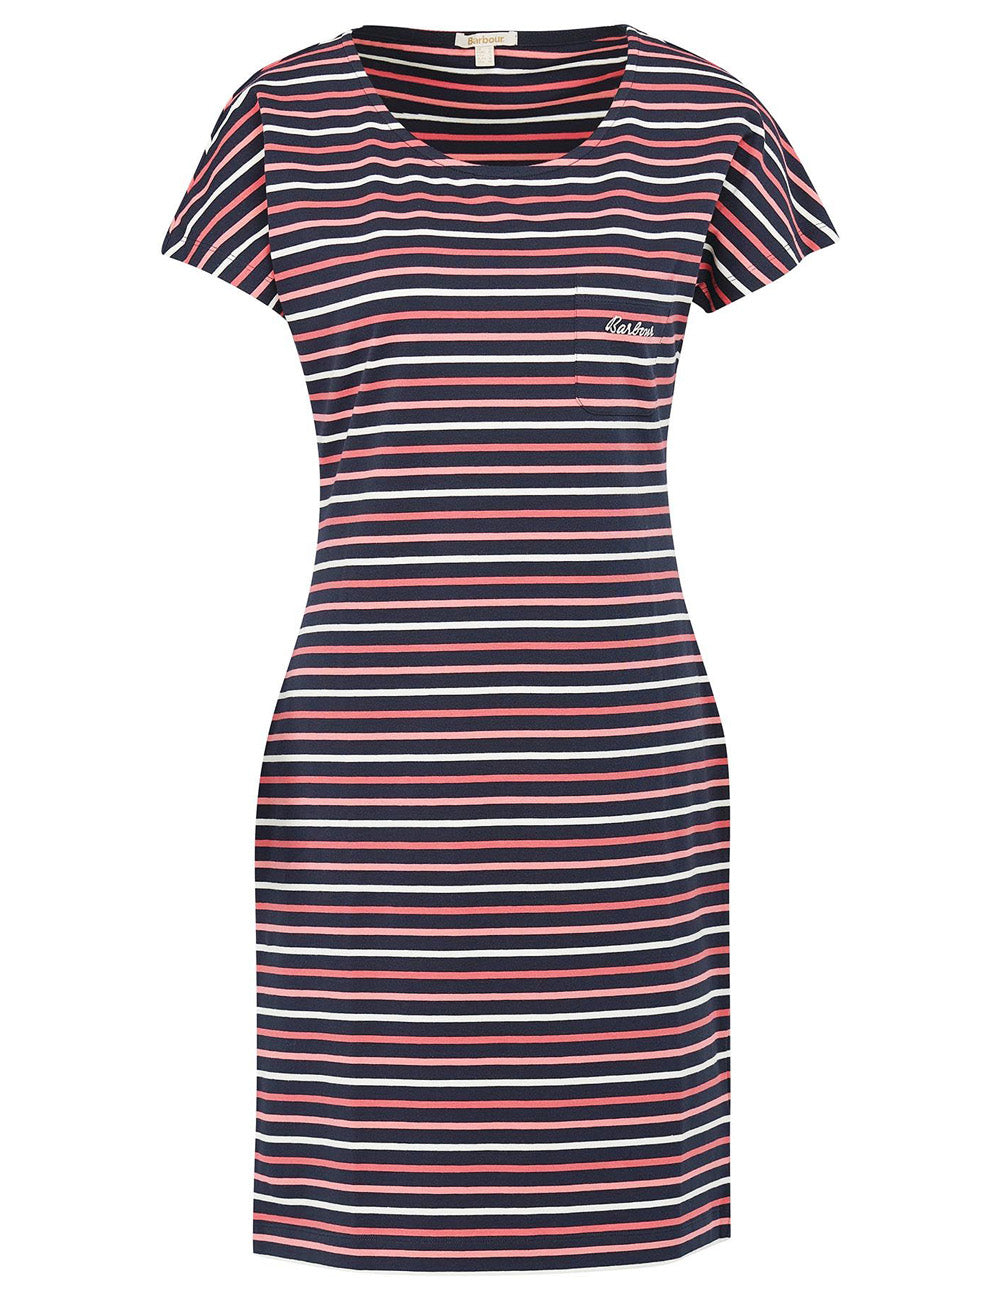 Barbour Harewood Stripe Dress on a white background